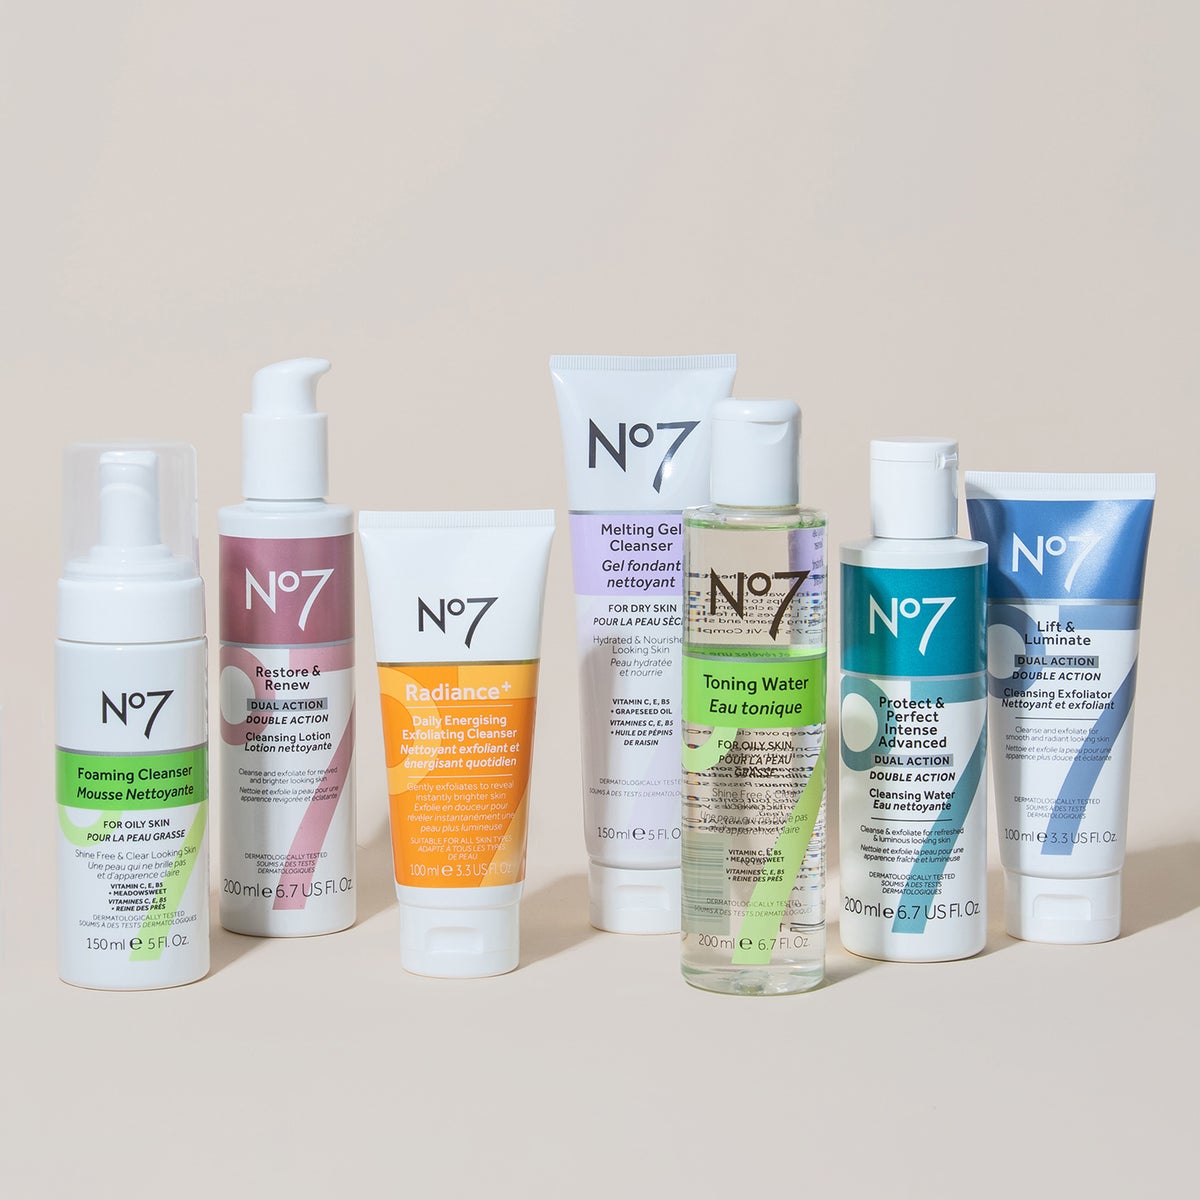 FREE CLEANSERS FOR MYNo7 MEMBERS. Get a FREE Cleanser when you spend $70. SHOP NOW.